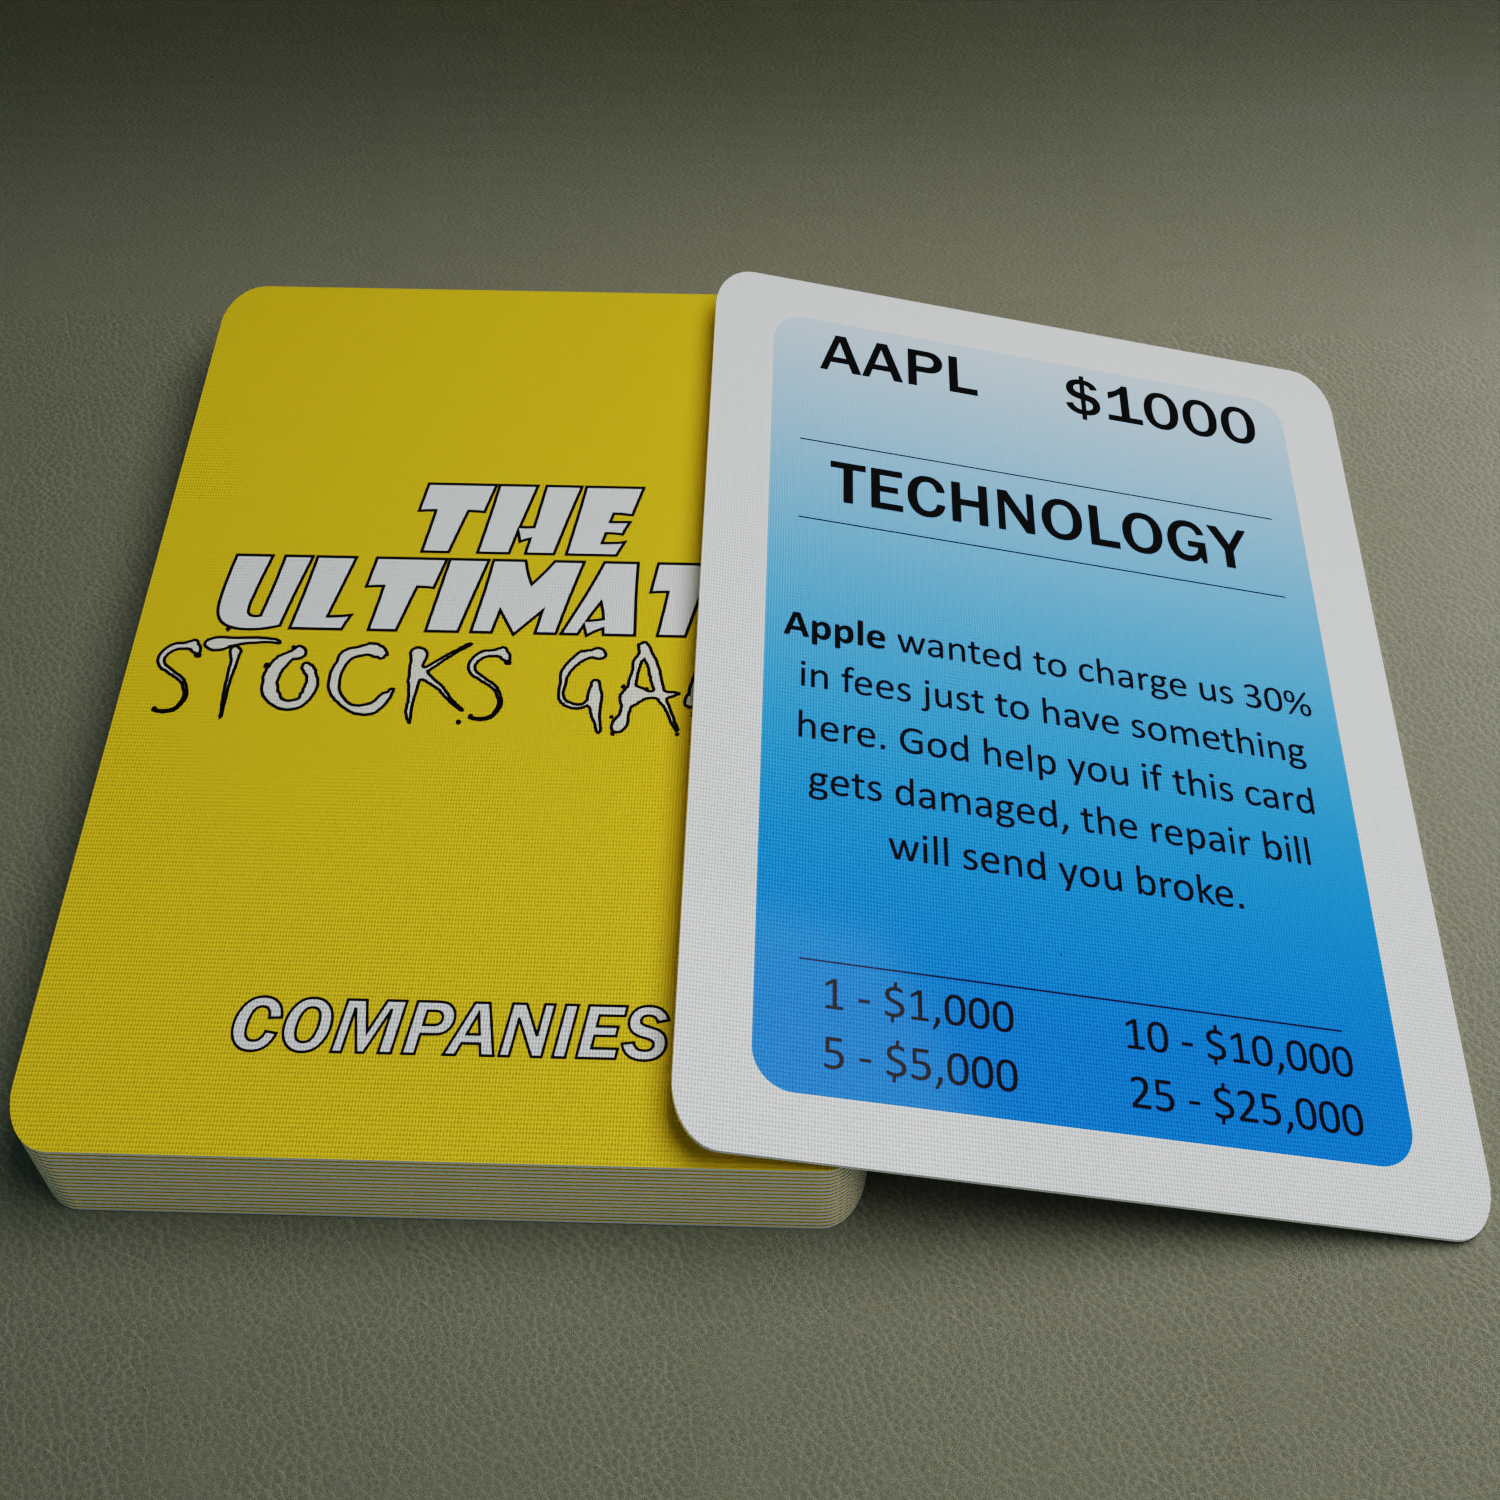 AAPL Company Card